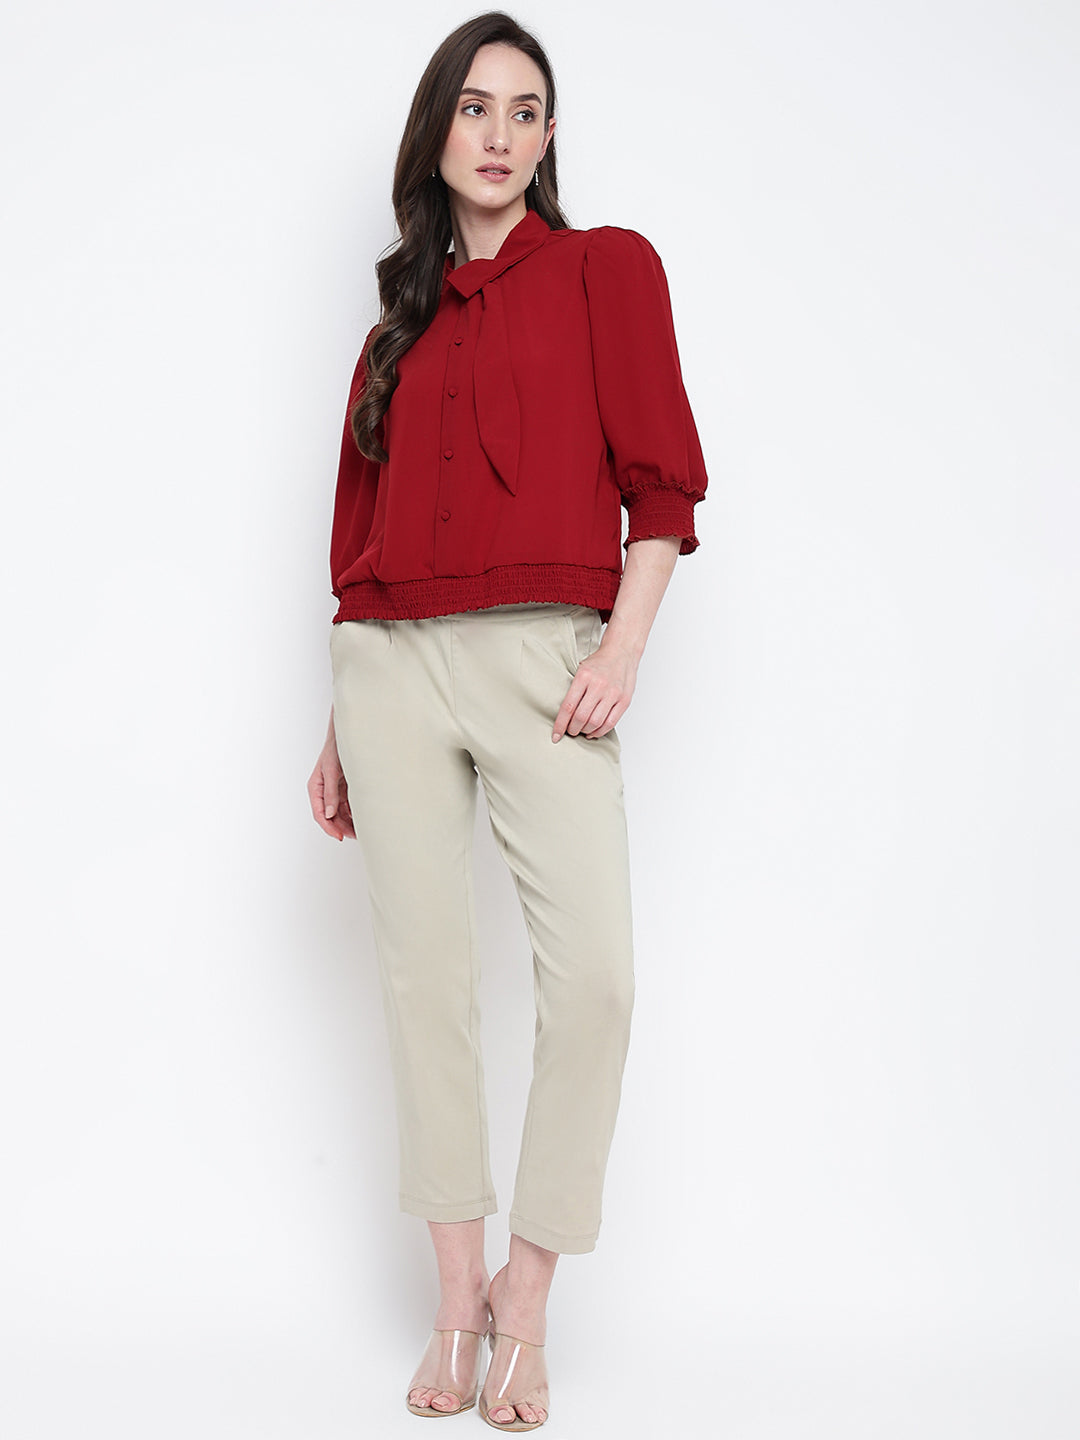 Maroon 3/4 Sleeve Solid Blouse Blouse